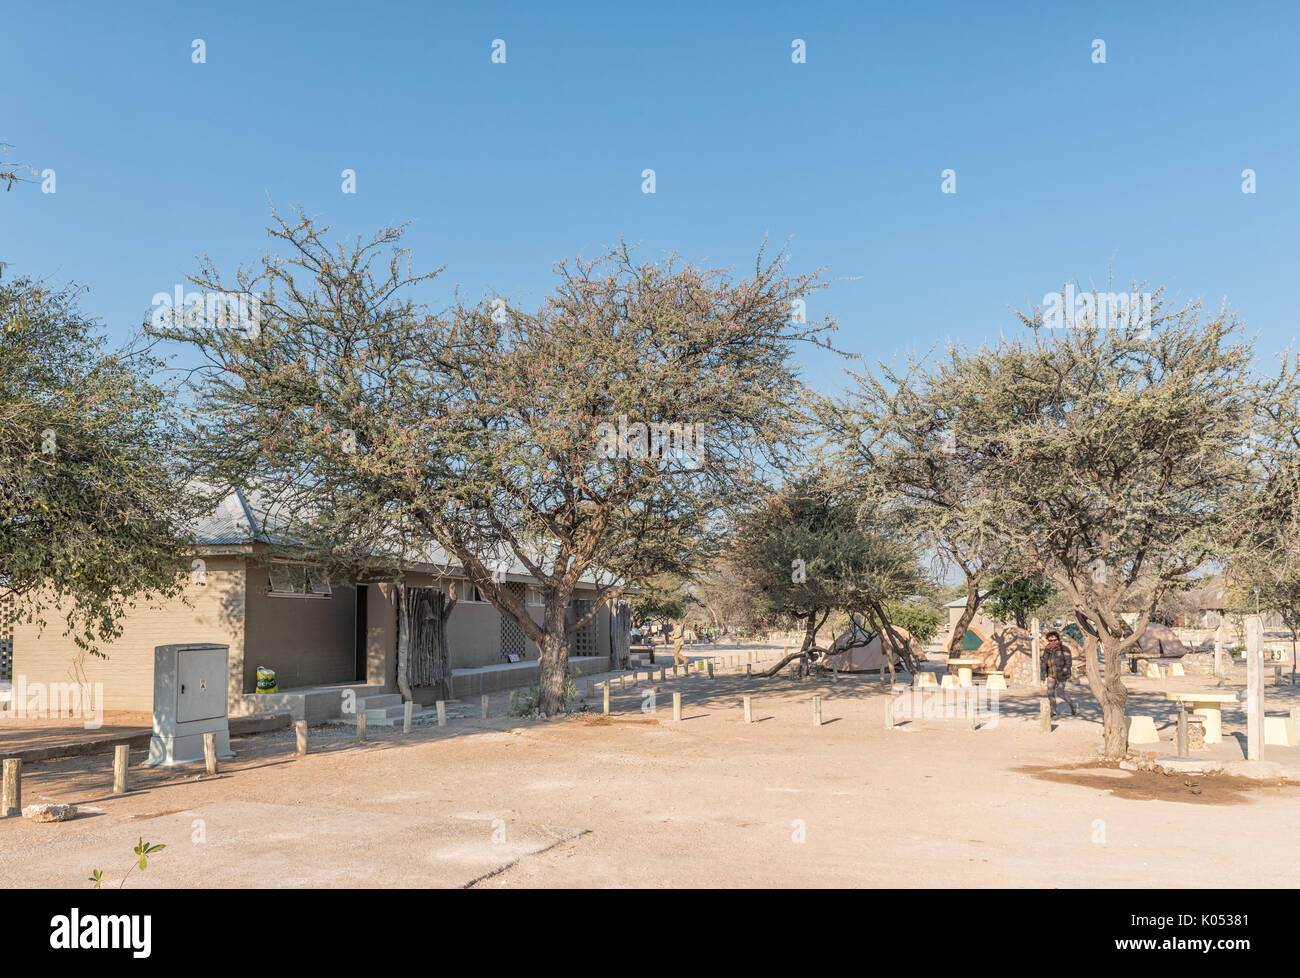 ETOSHA NATIONAL PARK, NAMIBIA - JUNE 26, 2017: A view of the camping area and ablution facilities at the Okaukeujo Rest Camp in the Etosha National Pa Stock Photo